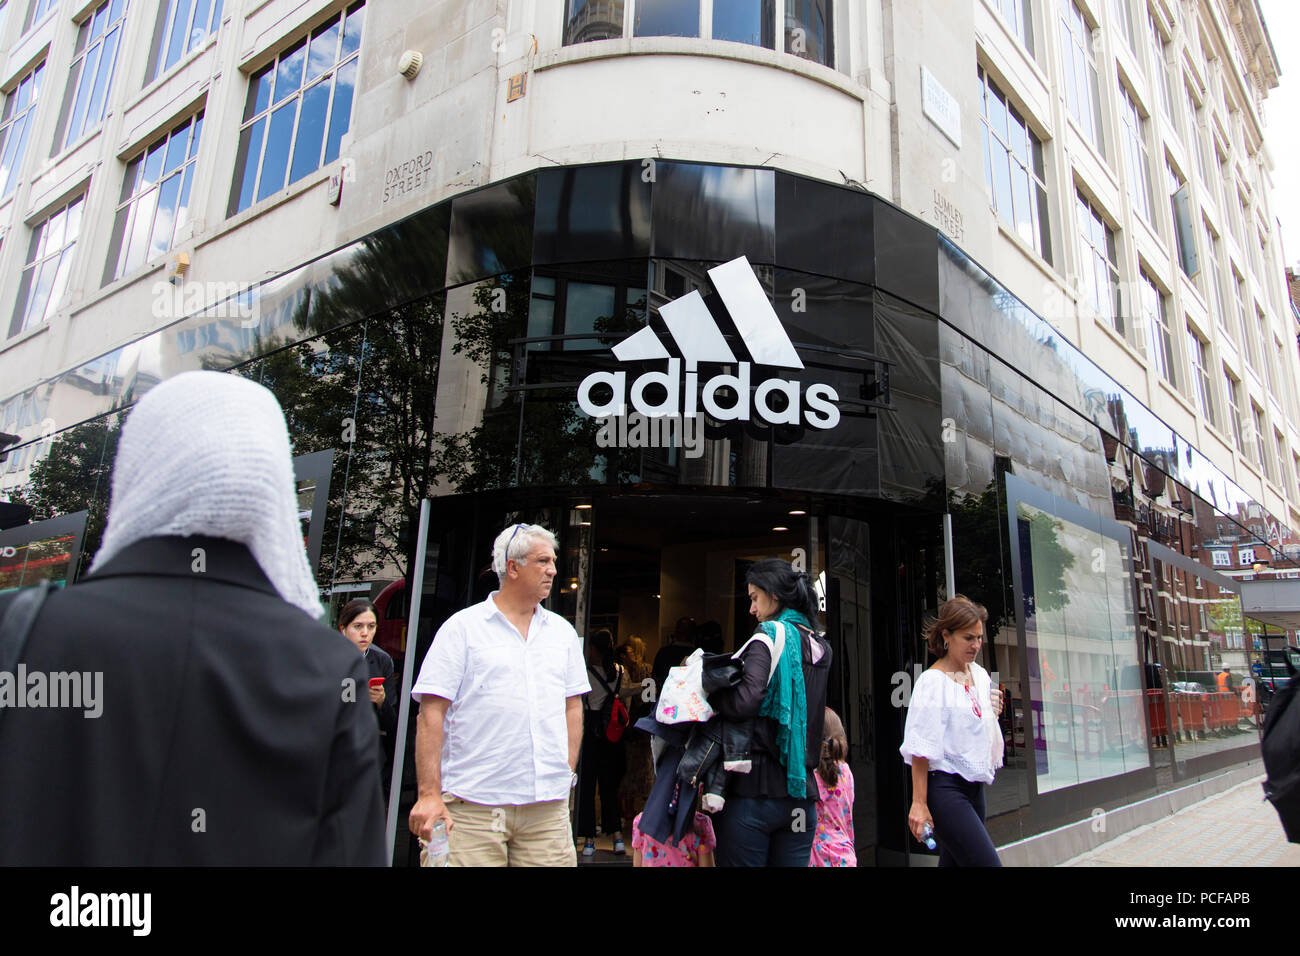 adidas commercial street